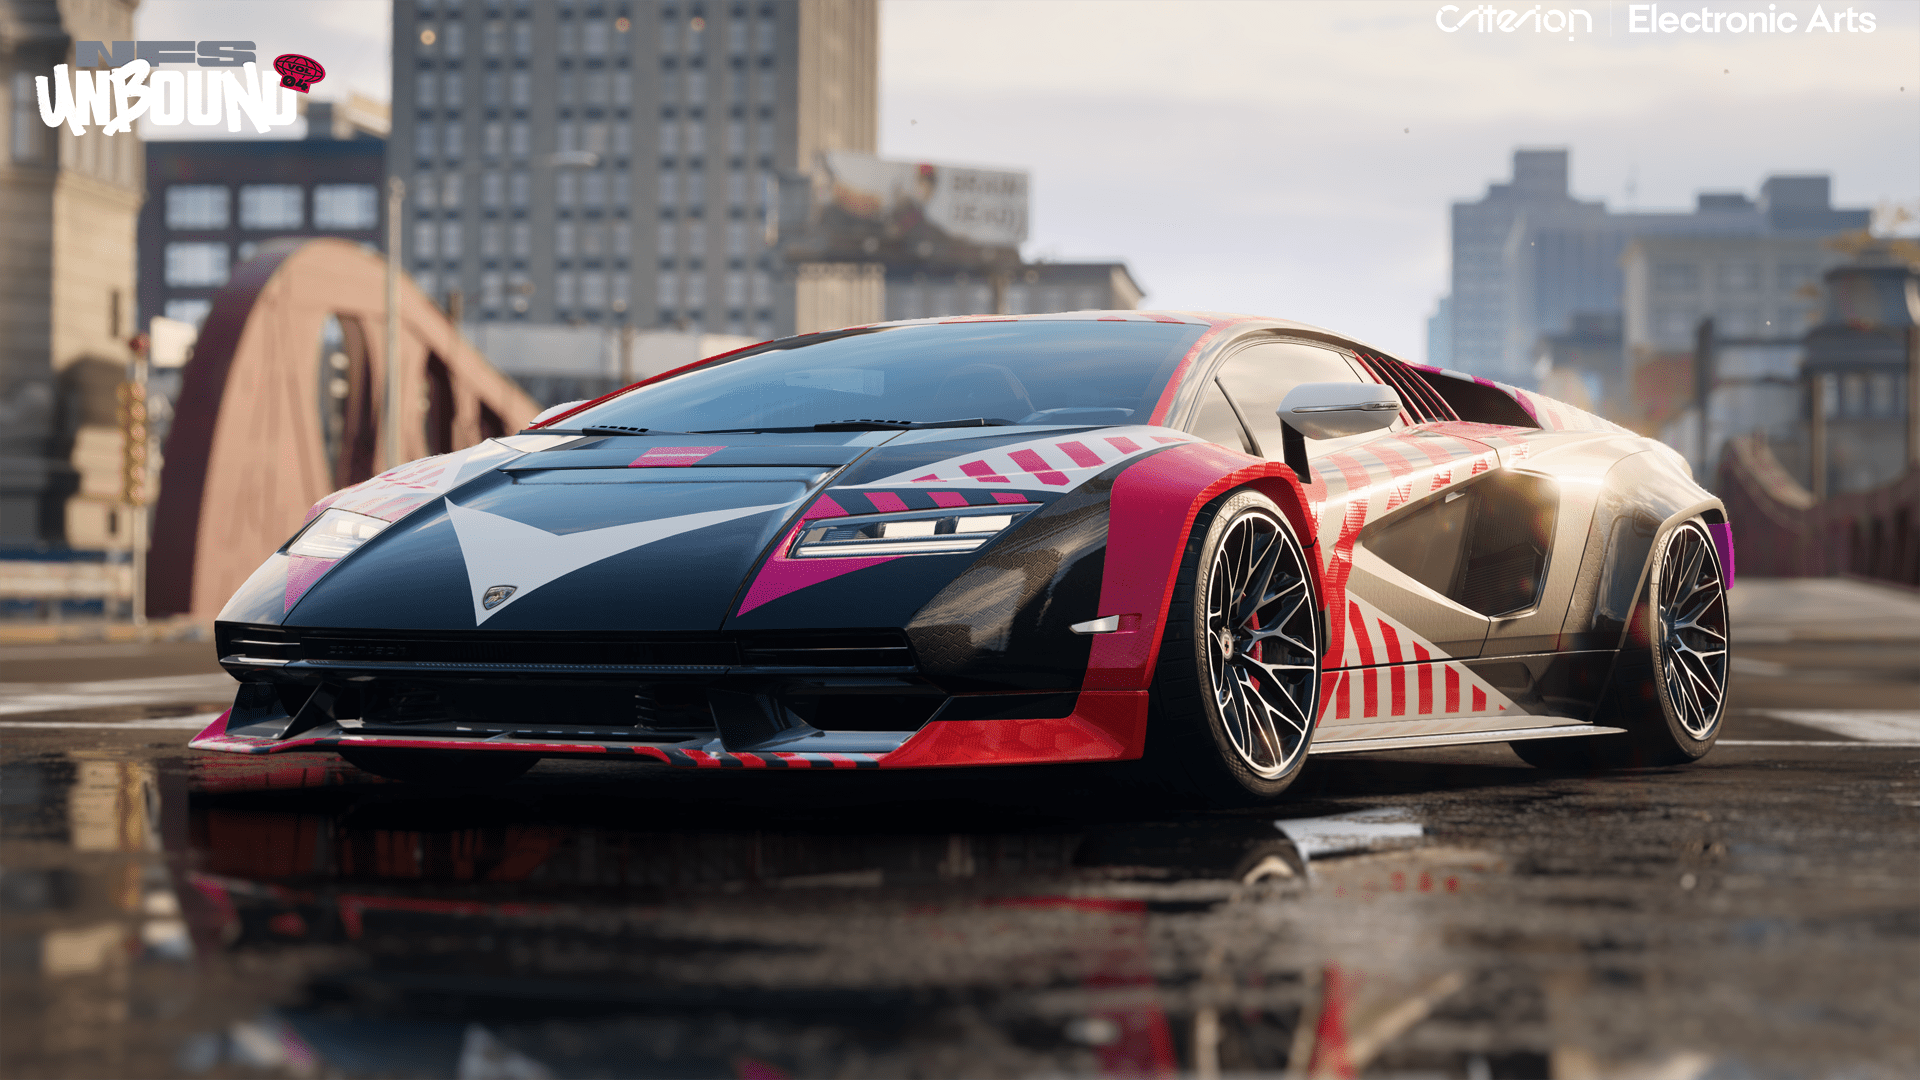 NFS - Need for Speed Unbound Vol 4 Lamborghini